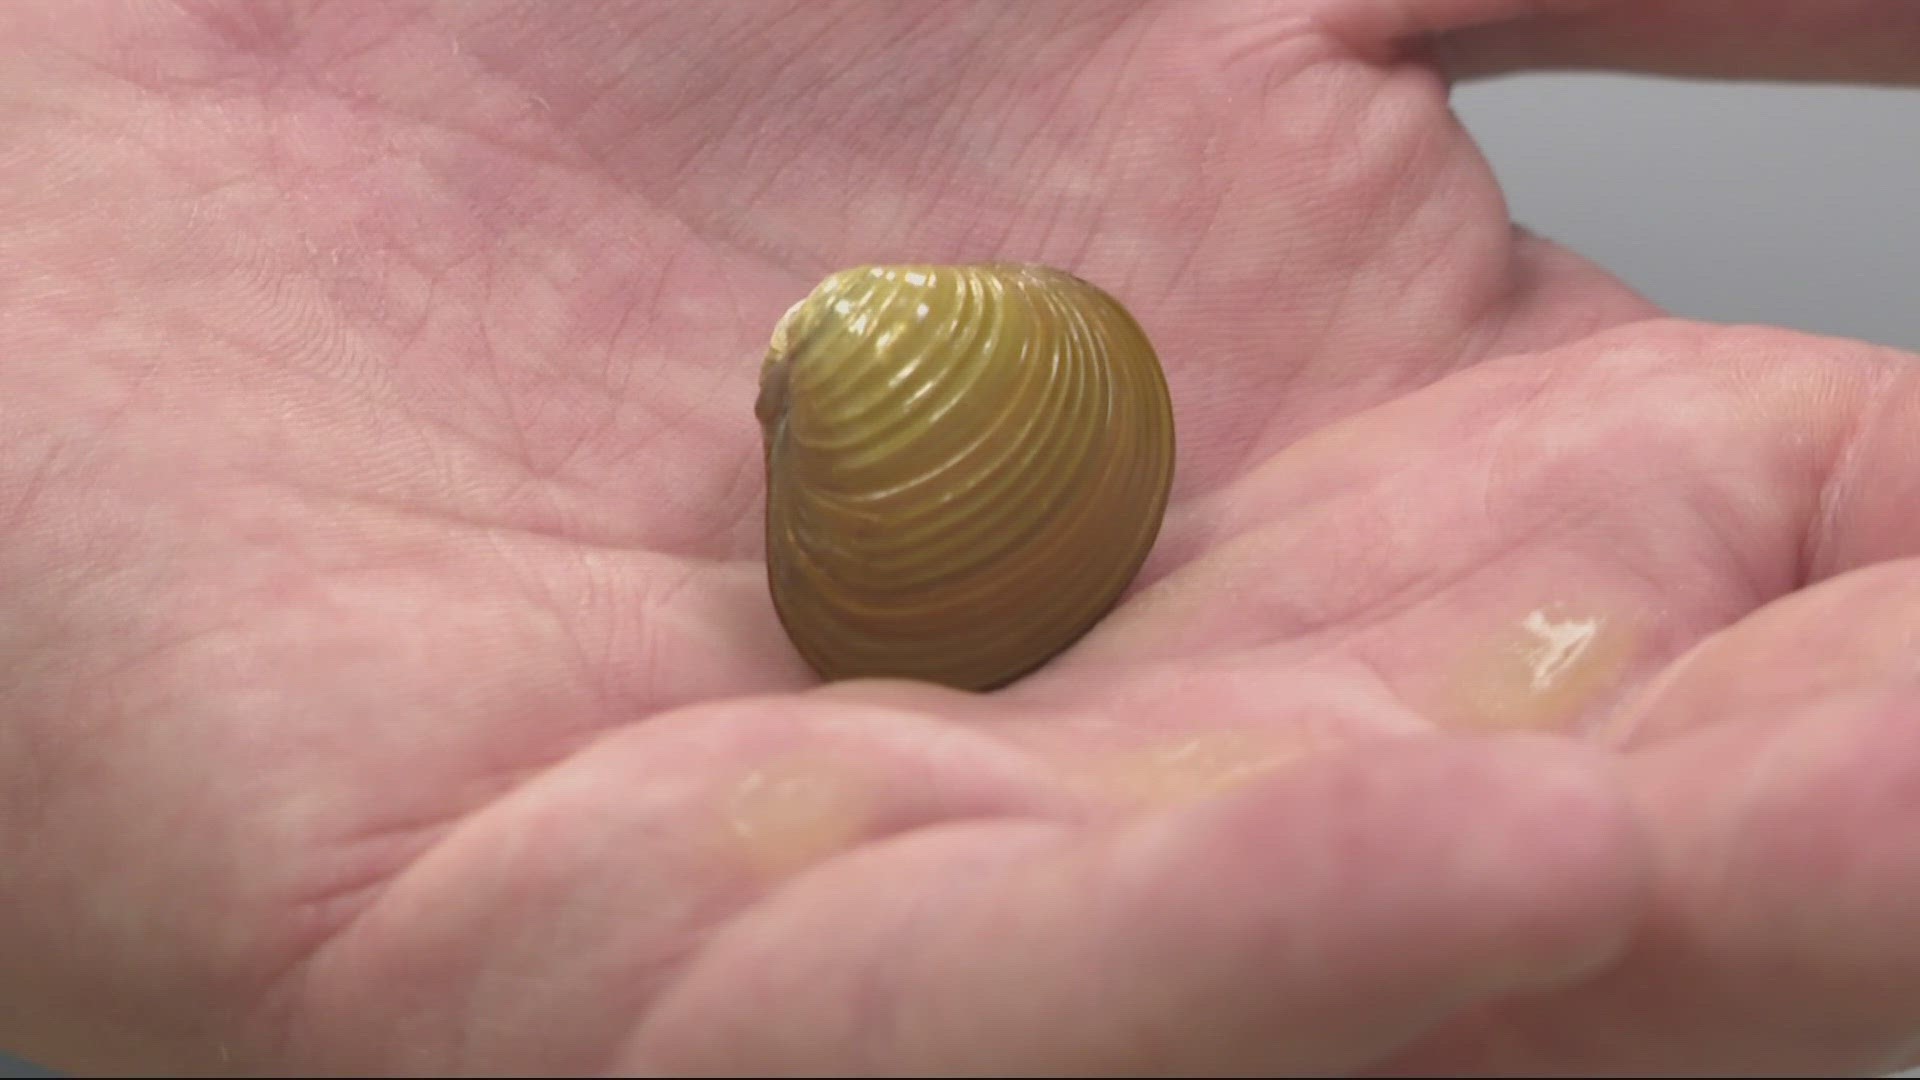 Invasive Asian clams have appeared in the Columbia River in large numbers, according to a study by a team from Washington State University, Vancouver.